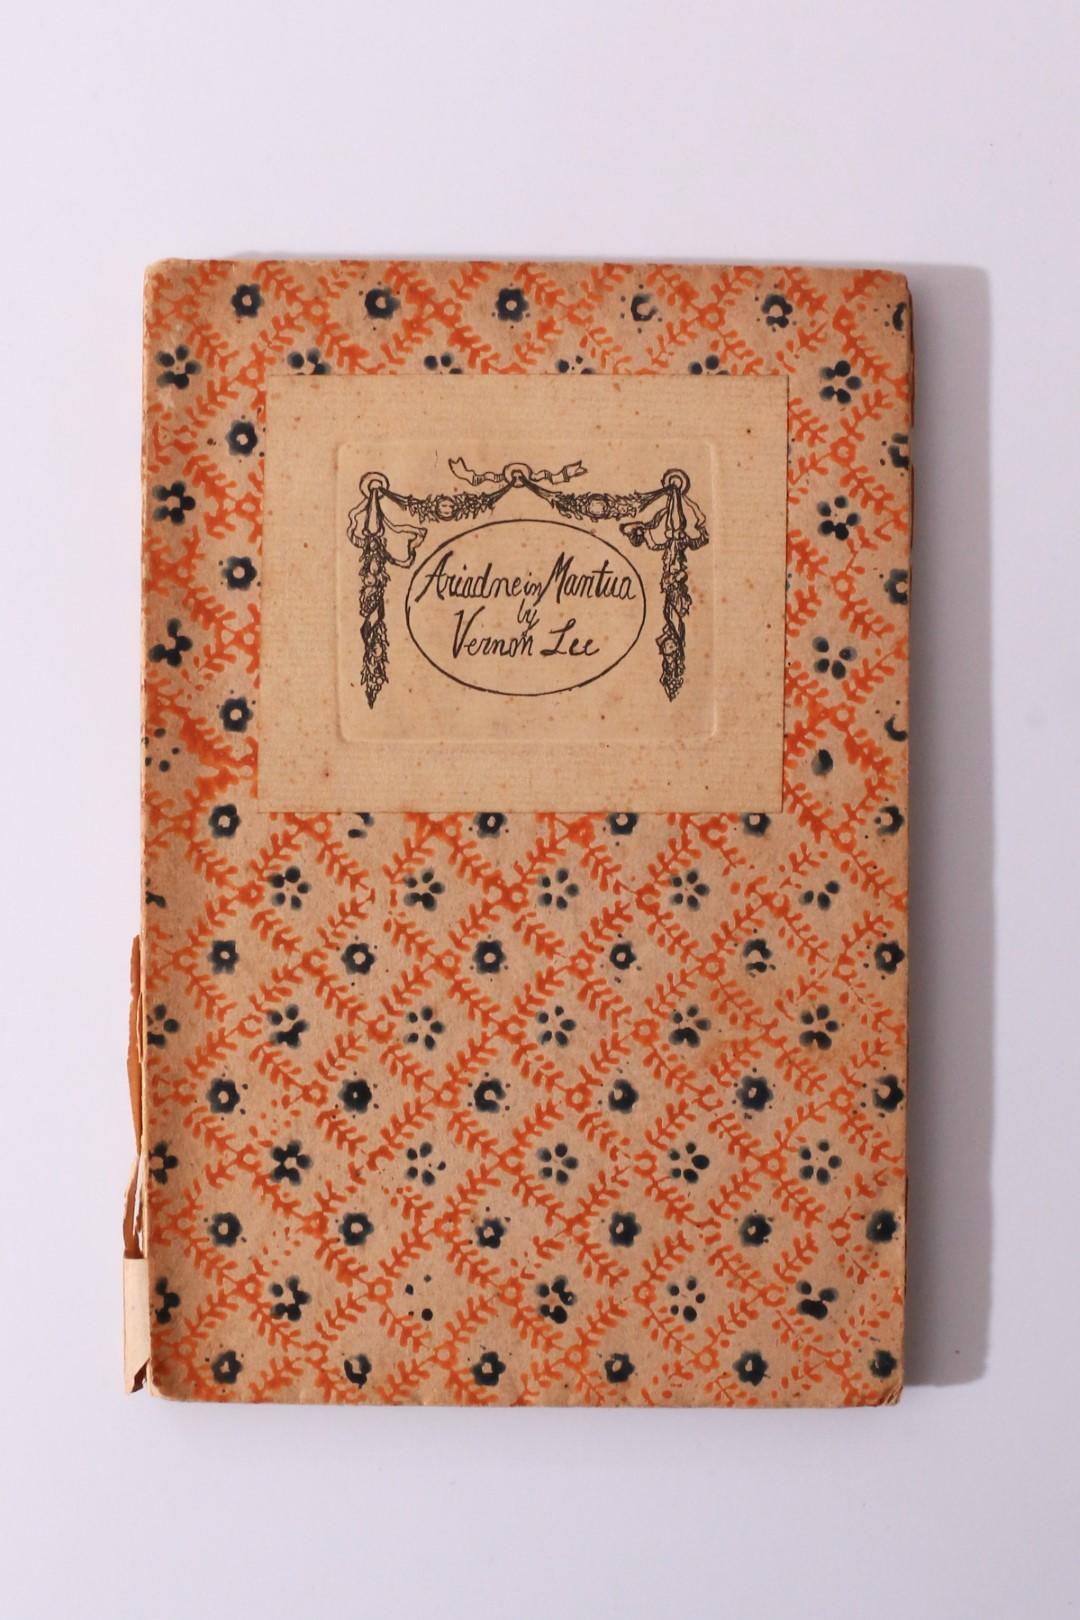 Vernon Lee - Ariadne in Mantua: A Romance in Five Acts - Blackwell, 1903, Signed First Edition.